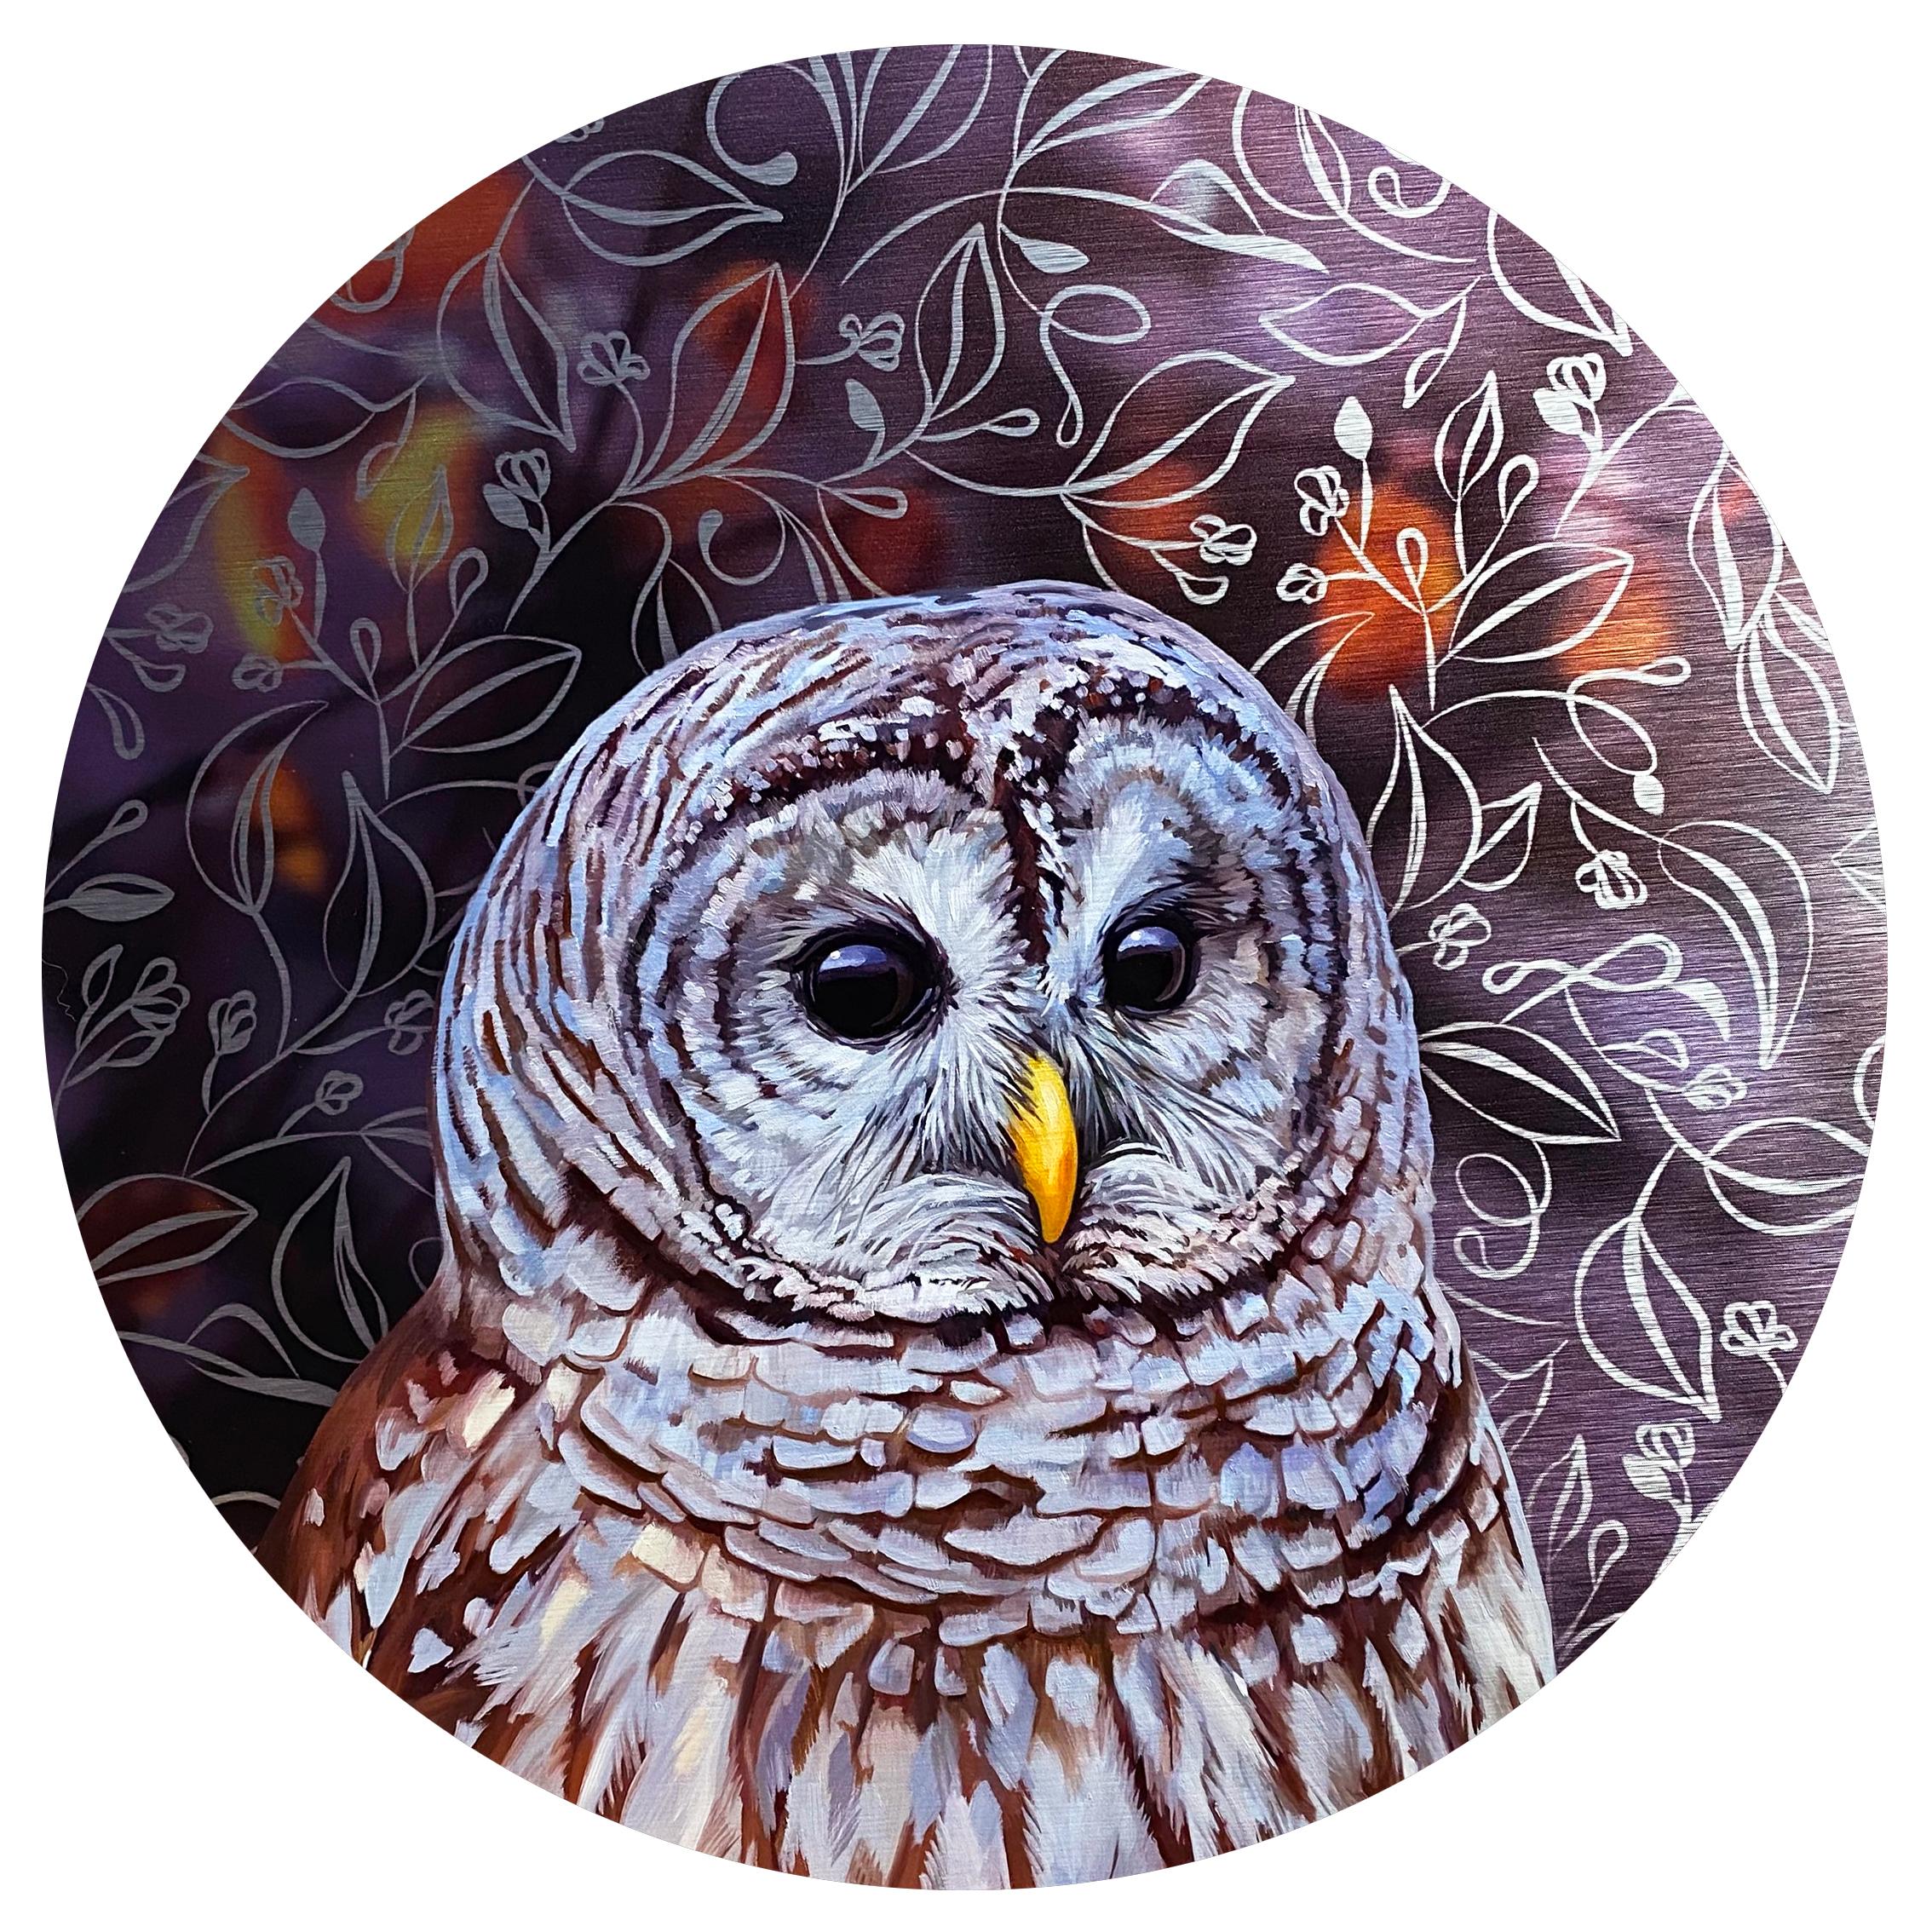 Allison Leigh Smith Figurative Painting - "Reflection: Barred Owl" - Original Oil Painting, Forest Bird Art